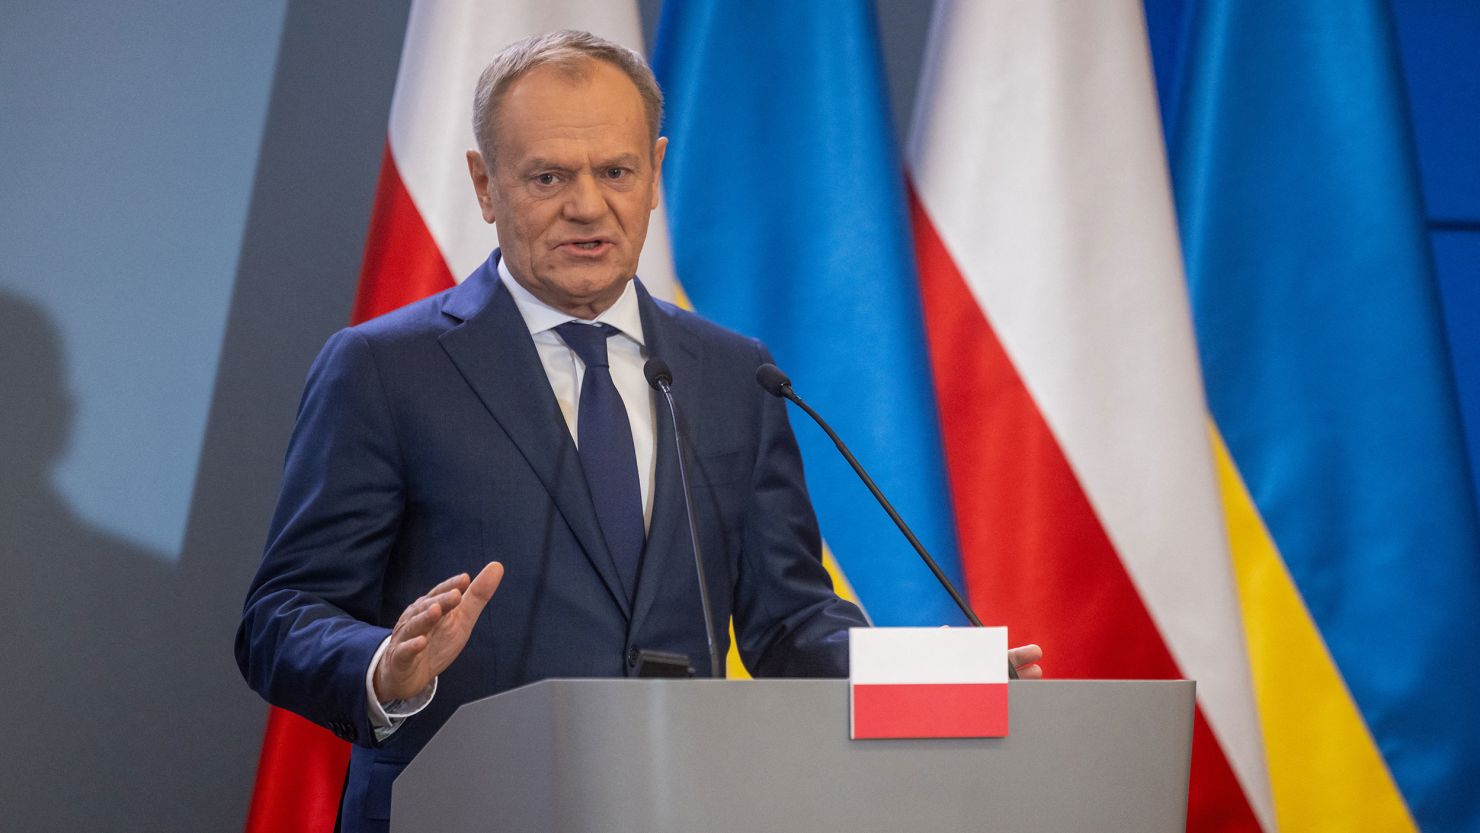 Tusk said "war is no longer a concept from the past" in an interview with German media.